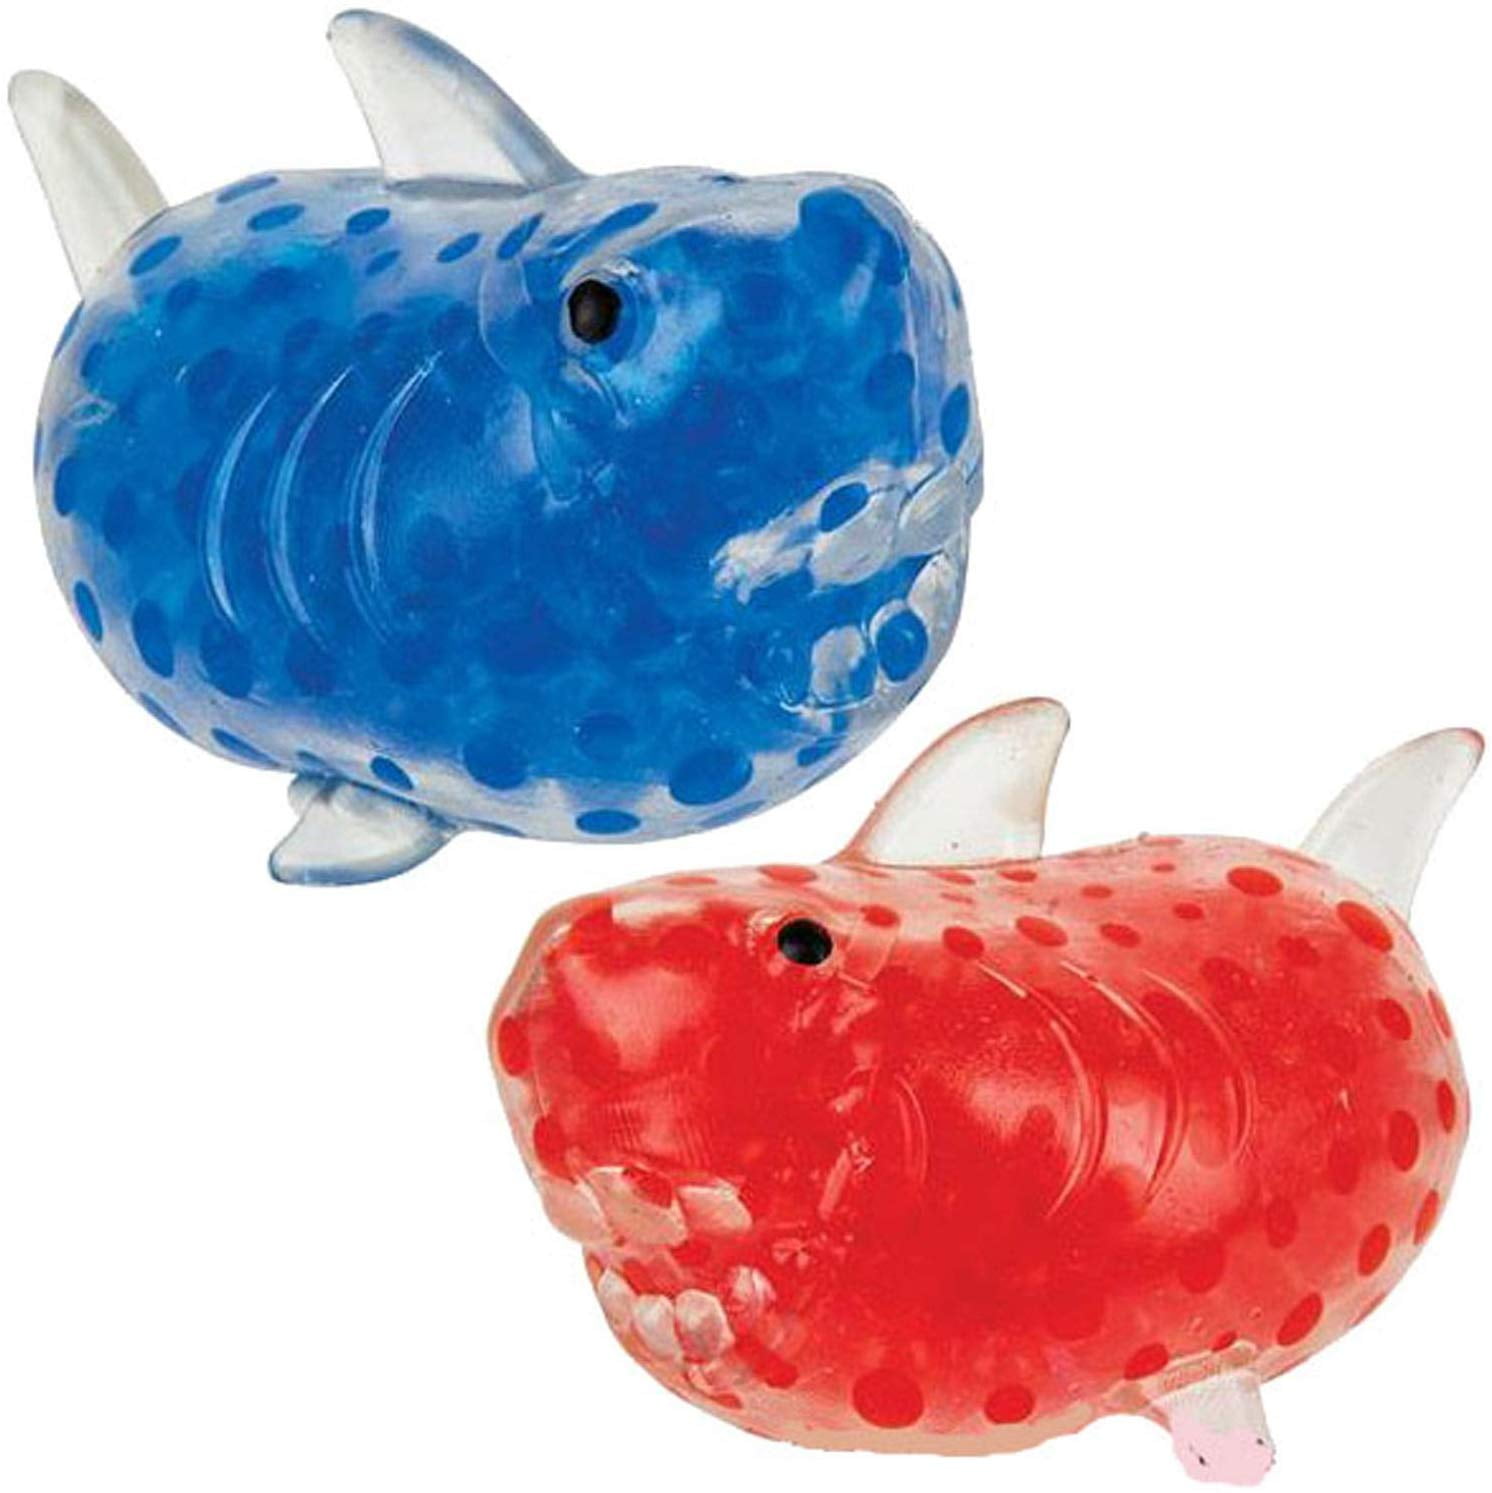 Light up Squishy squeeze gel bead filled SHARK toy autism special needs 12 Pcs 